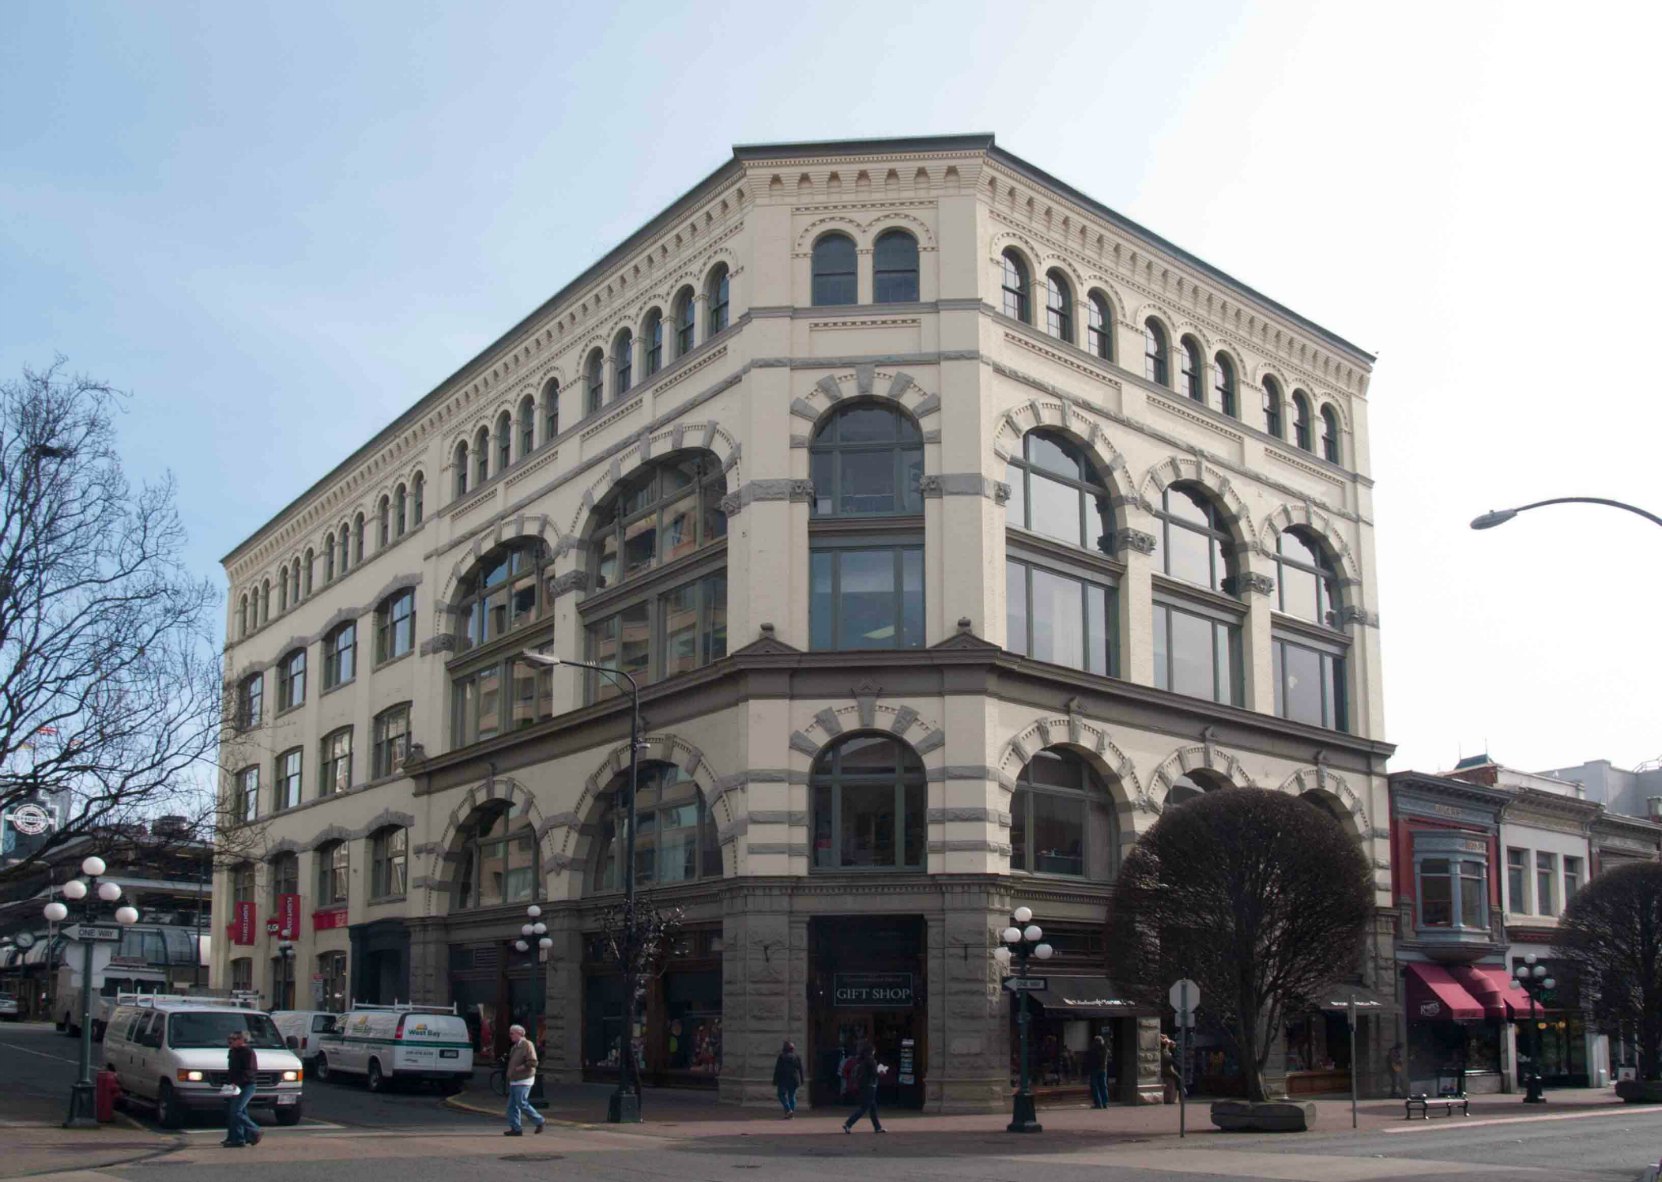 The Weiler Building, 921 Government Street / 609 Broughton Street, built in 1899 (photo by Victoria Online Sightseeing Tours)